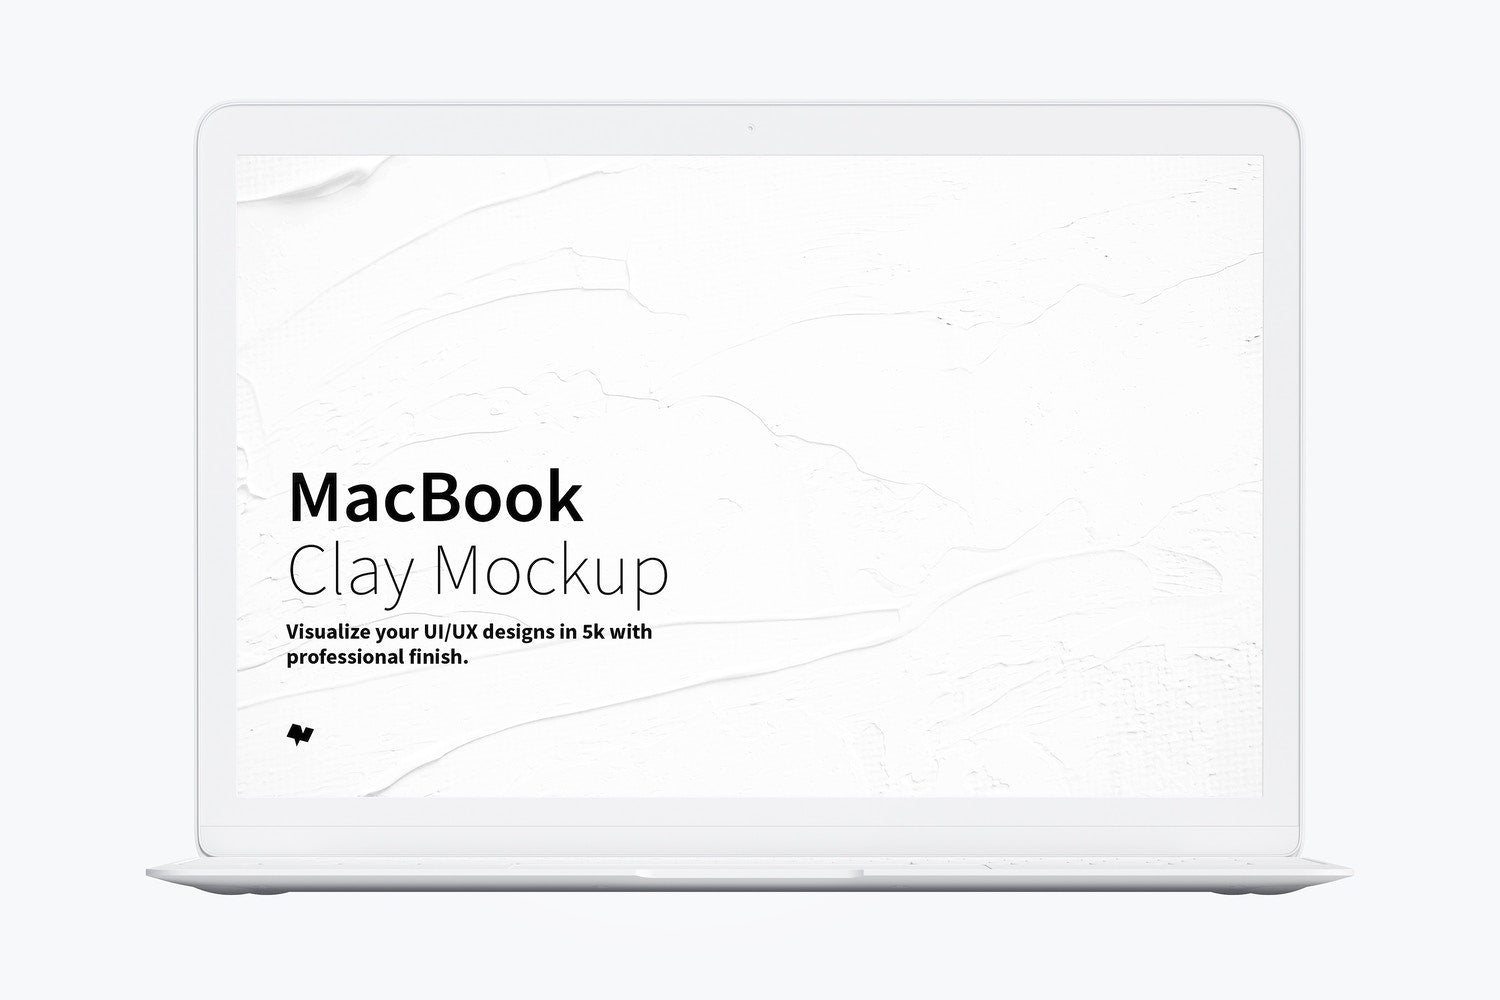 Free Clay Macbook Mockup, Front View